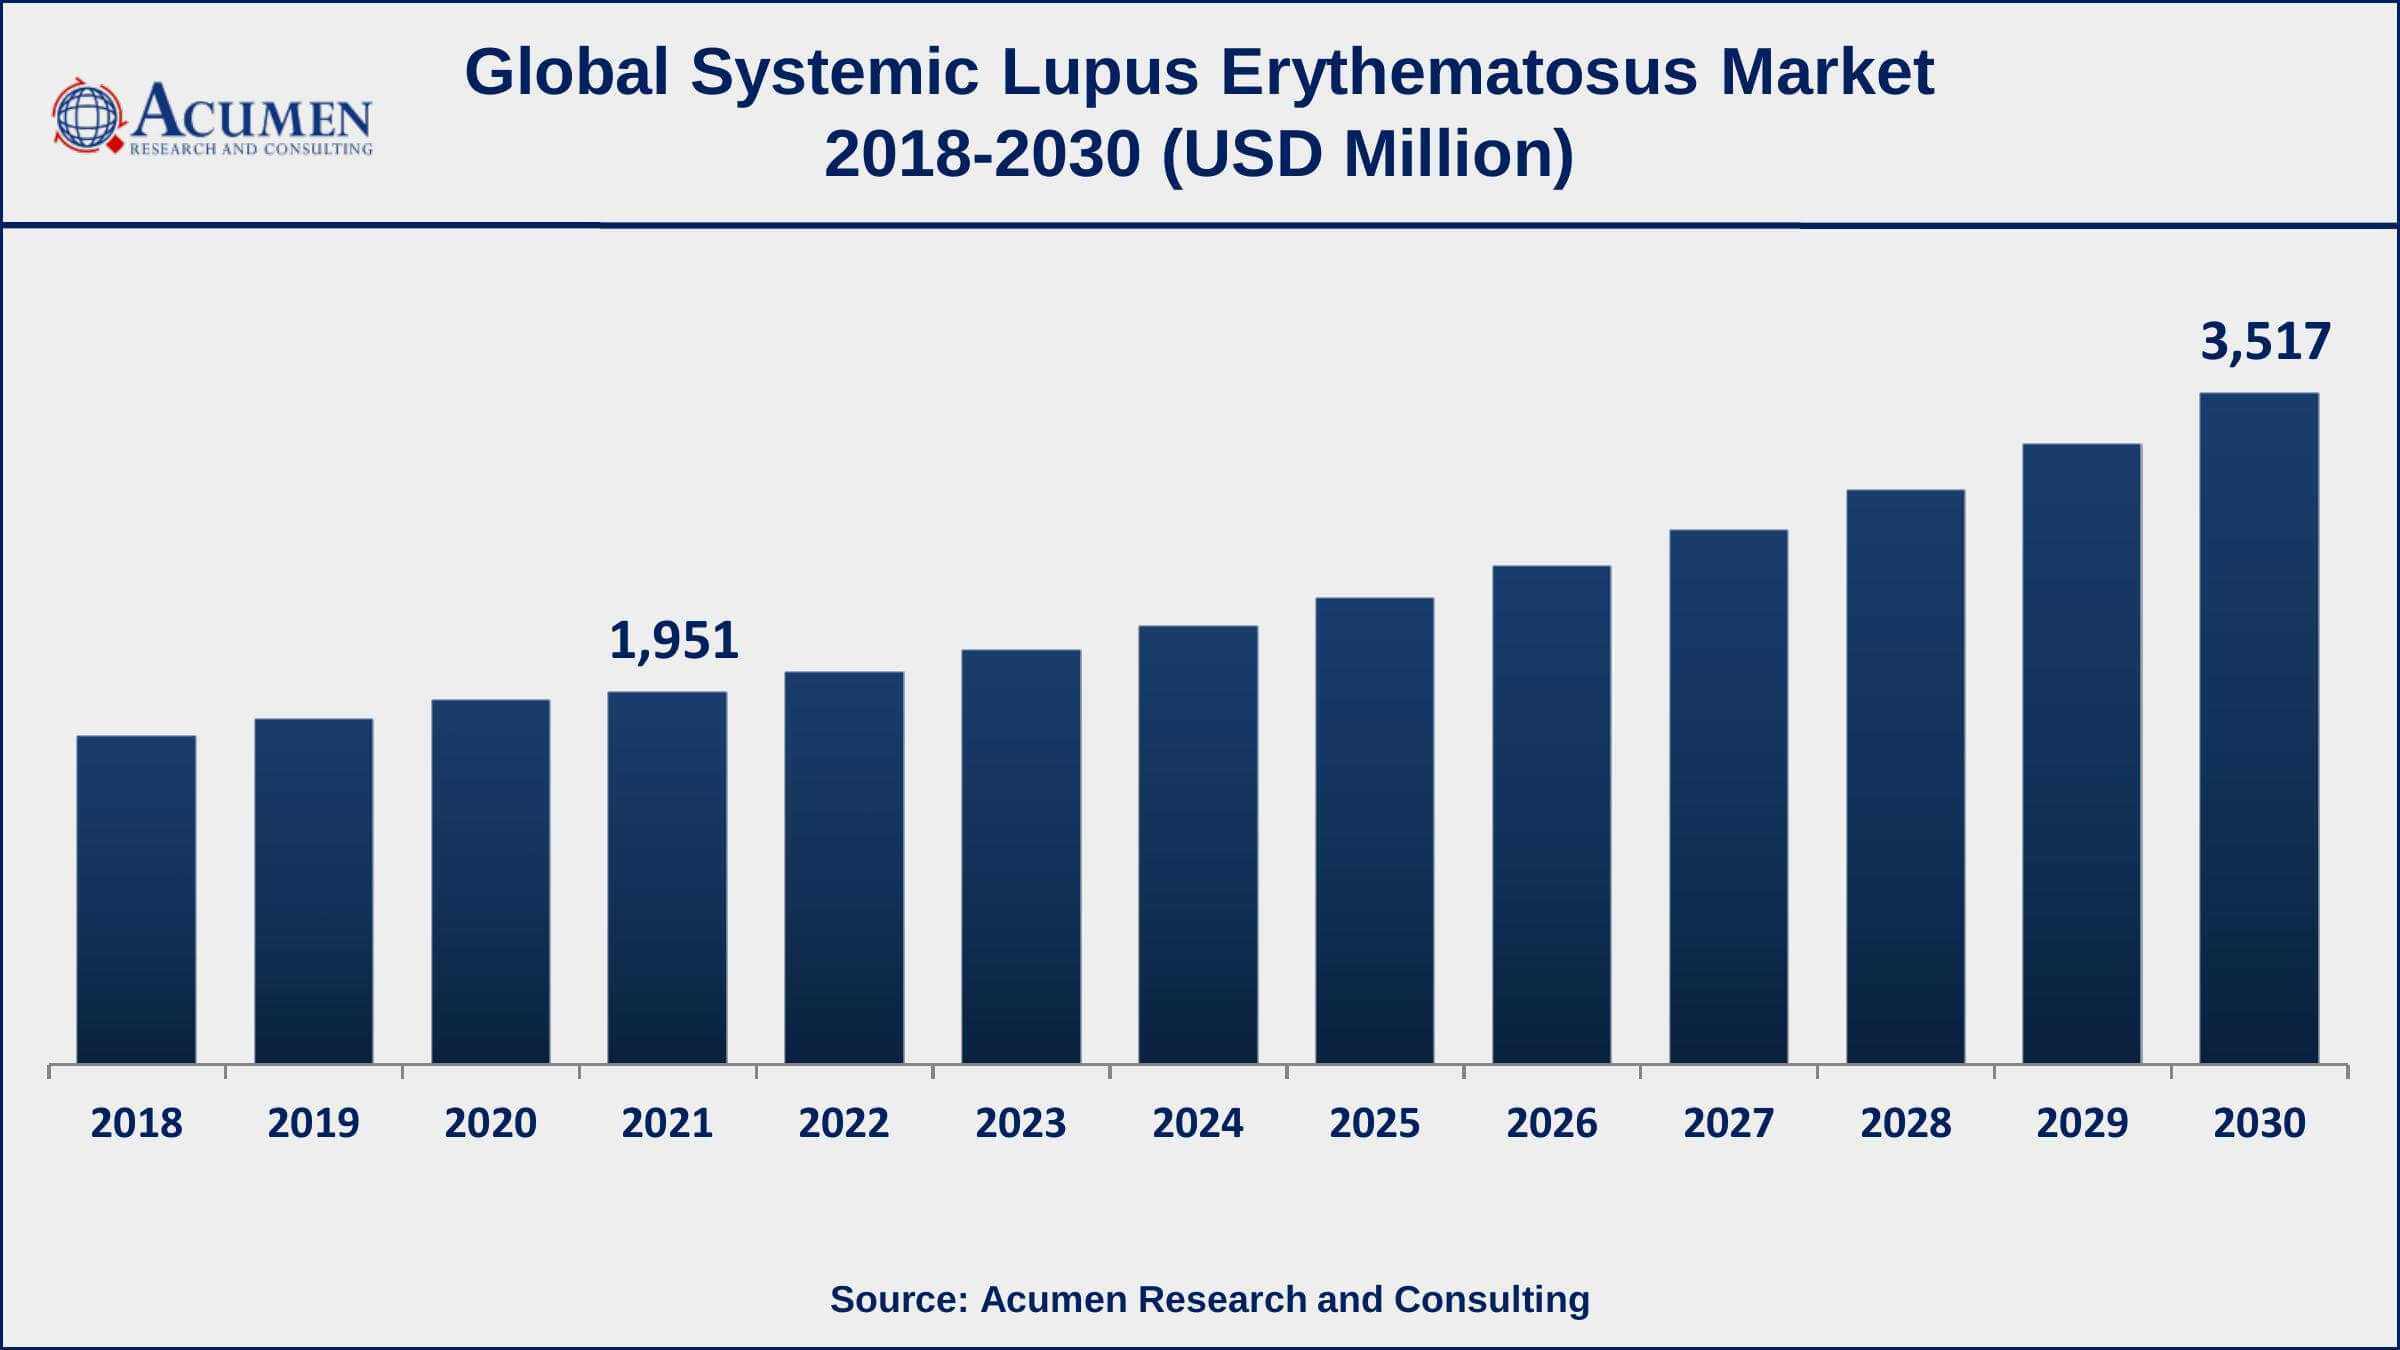 North America region accounted for over 51% of the systemic lupus erythematosus market shares in 2021